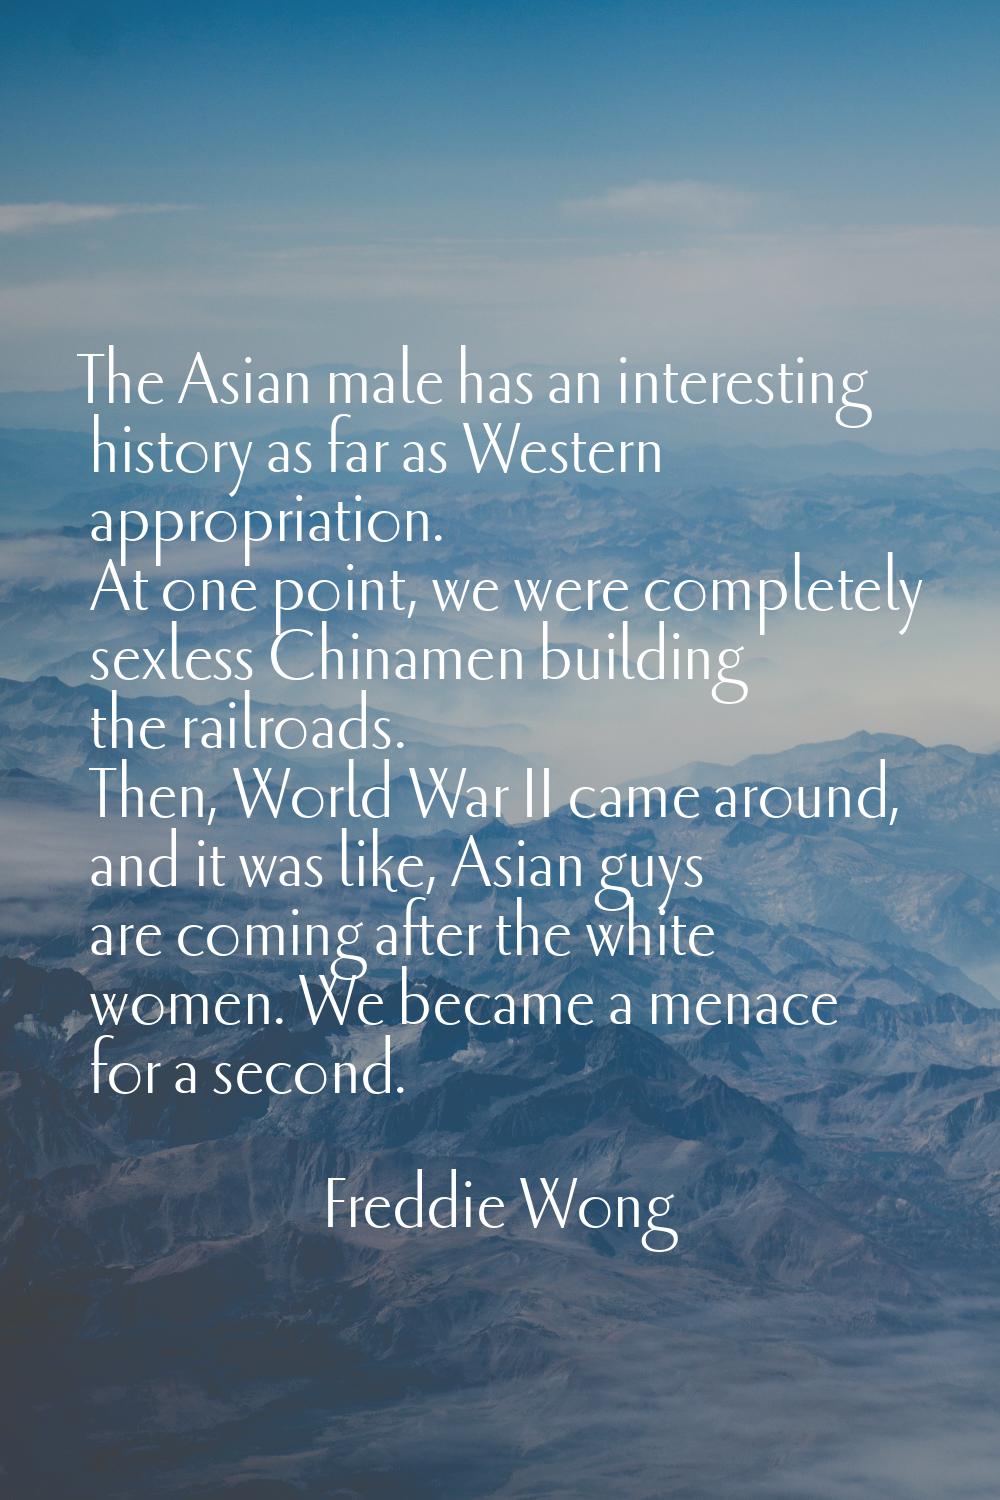 The Asian male has an interesting history as far as Western appropriation. At one point, we were co